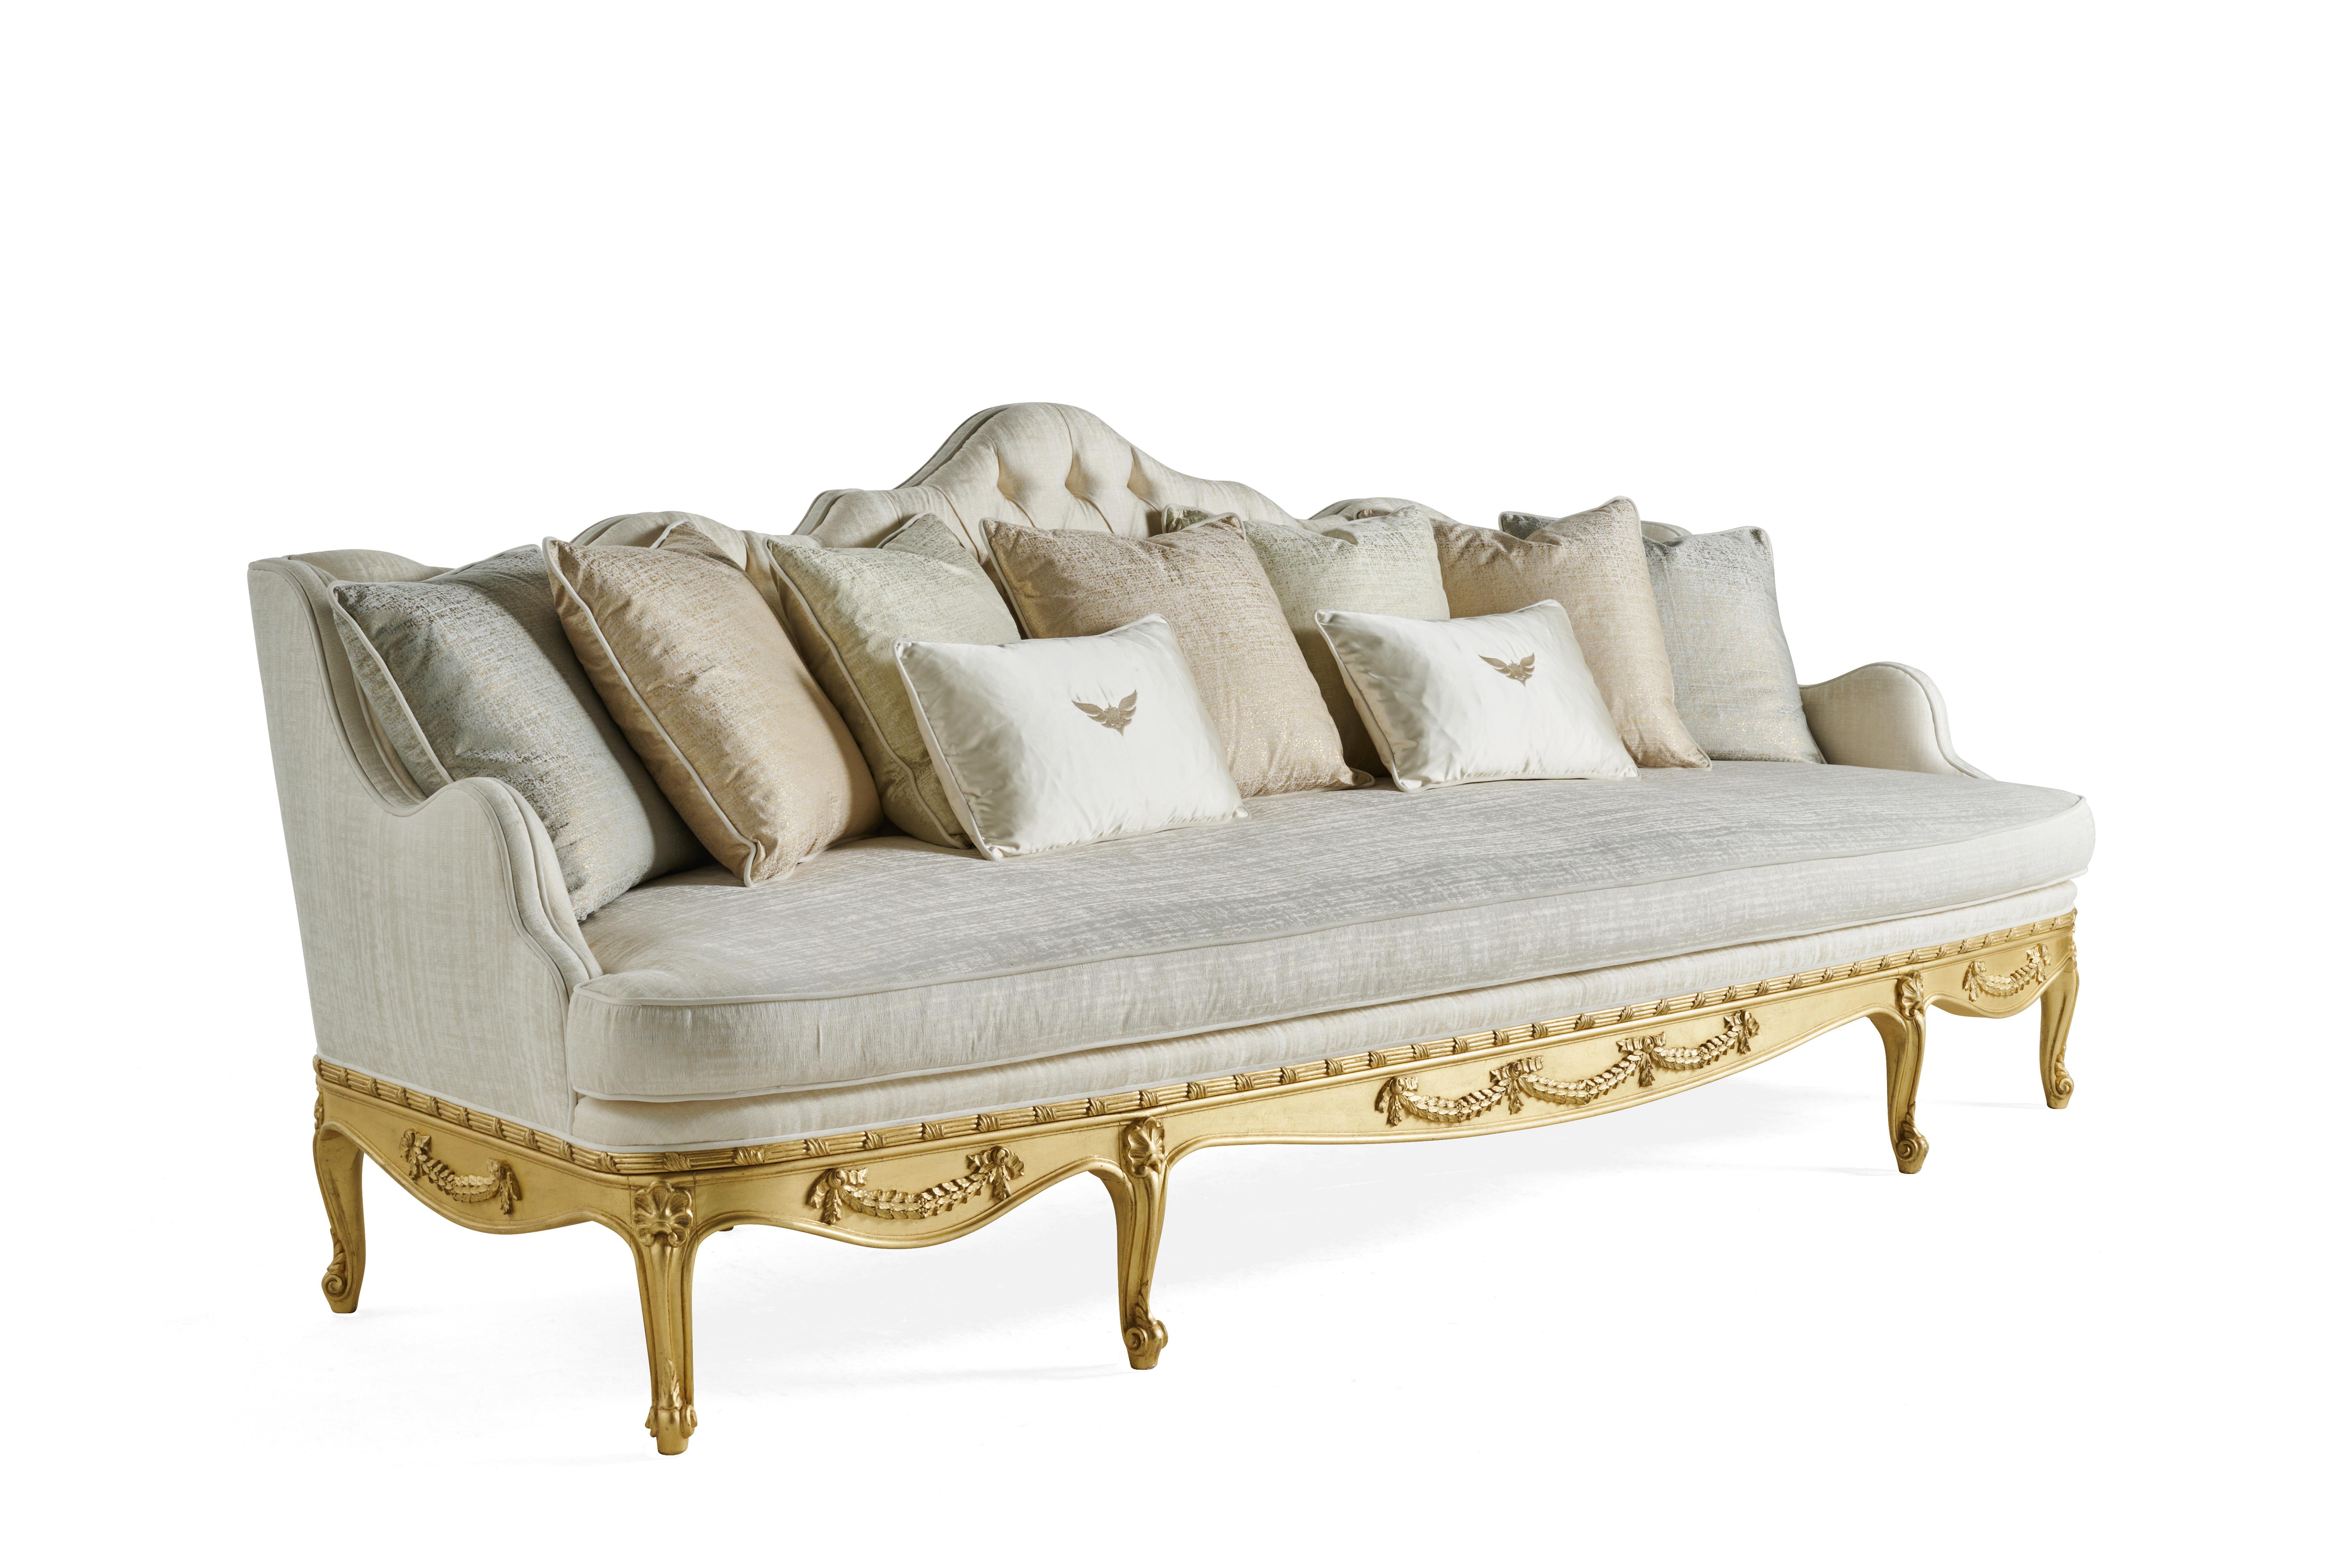 Sensual and welcoming, Verveine furniture embellishes any environment with its French flavor. In addition to the base in hand-carved wood with patinated antique gold finishing, Verveine is characterized by the complex wave-style upholstery of the